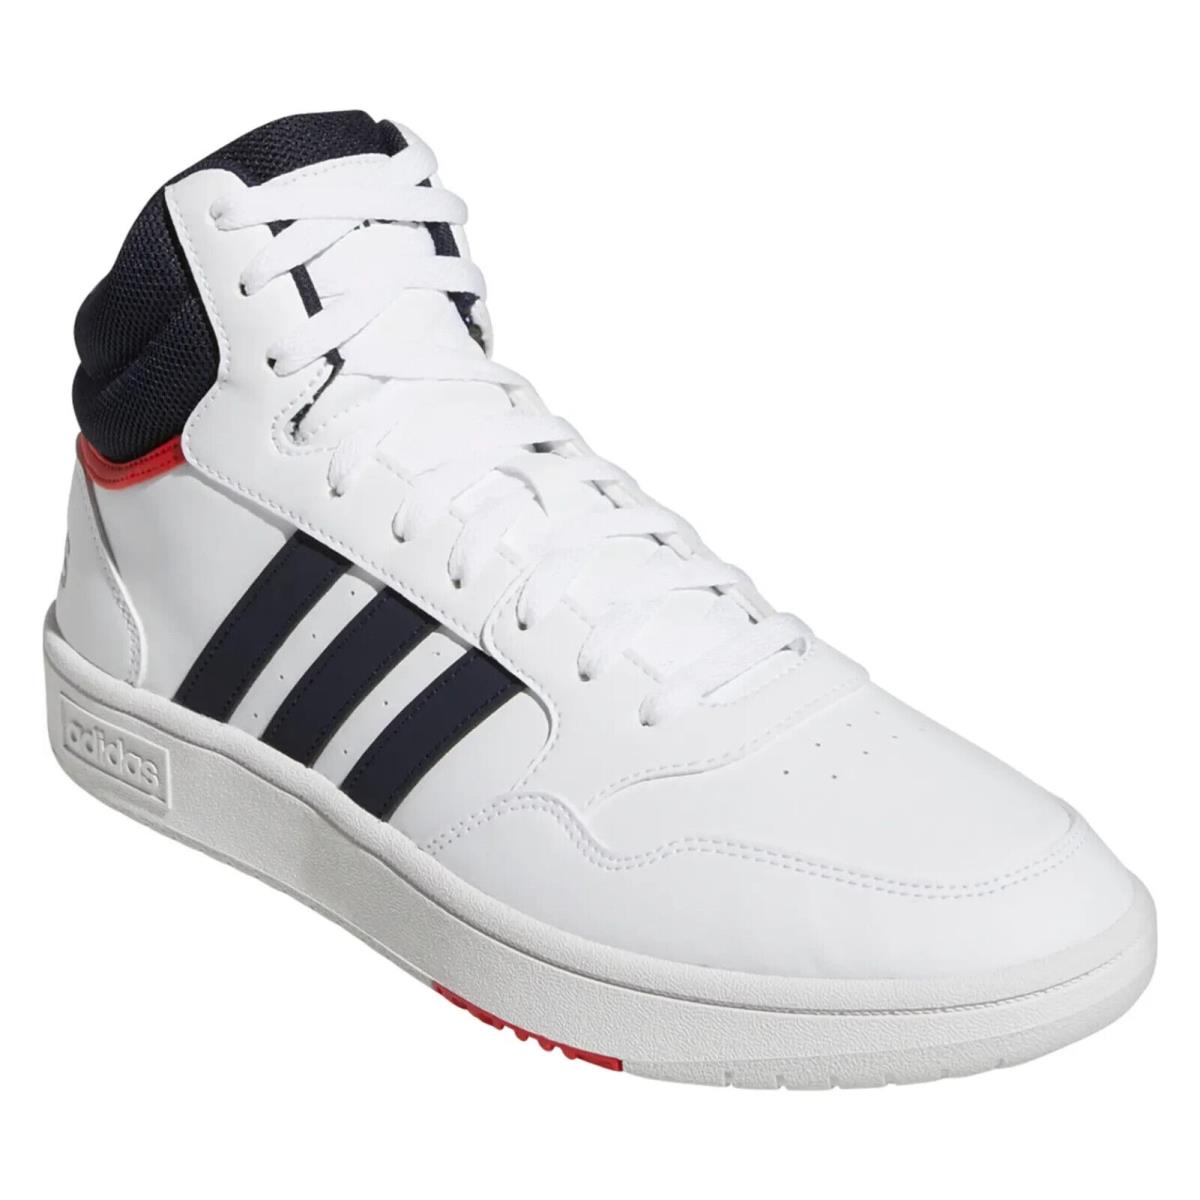 Men Adidas Hoops 3.0 Mid Basketball Shoes GY5543 White Legend Ink Red - White